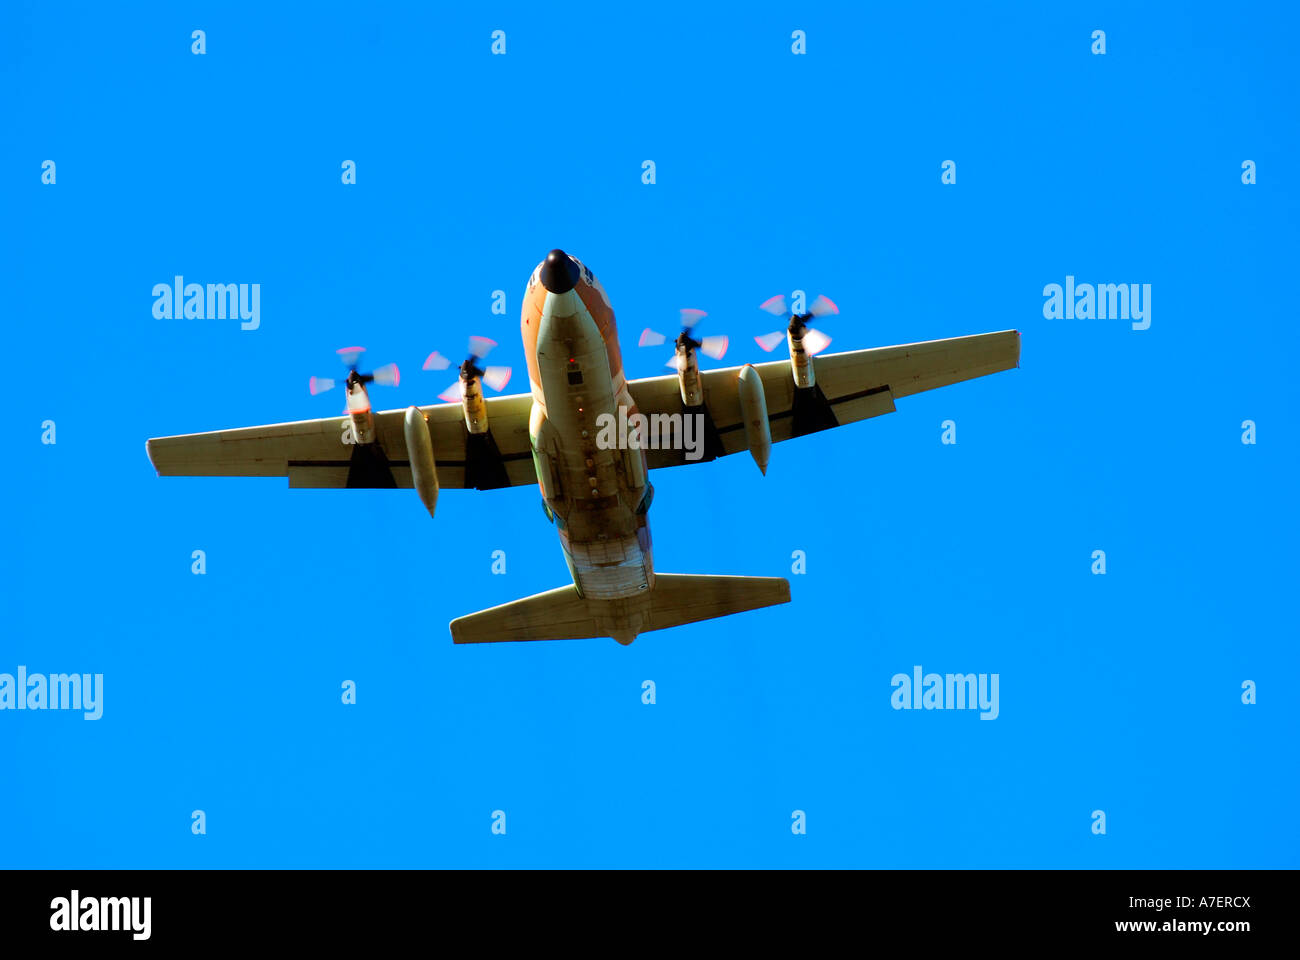 White propellor plane on blue sky background coming in to land Stock Photo